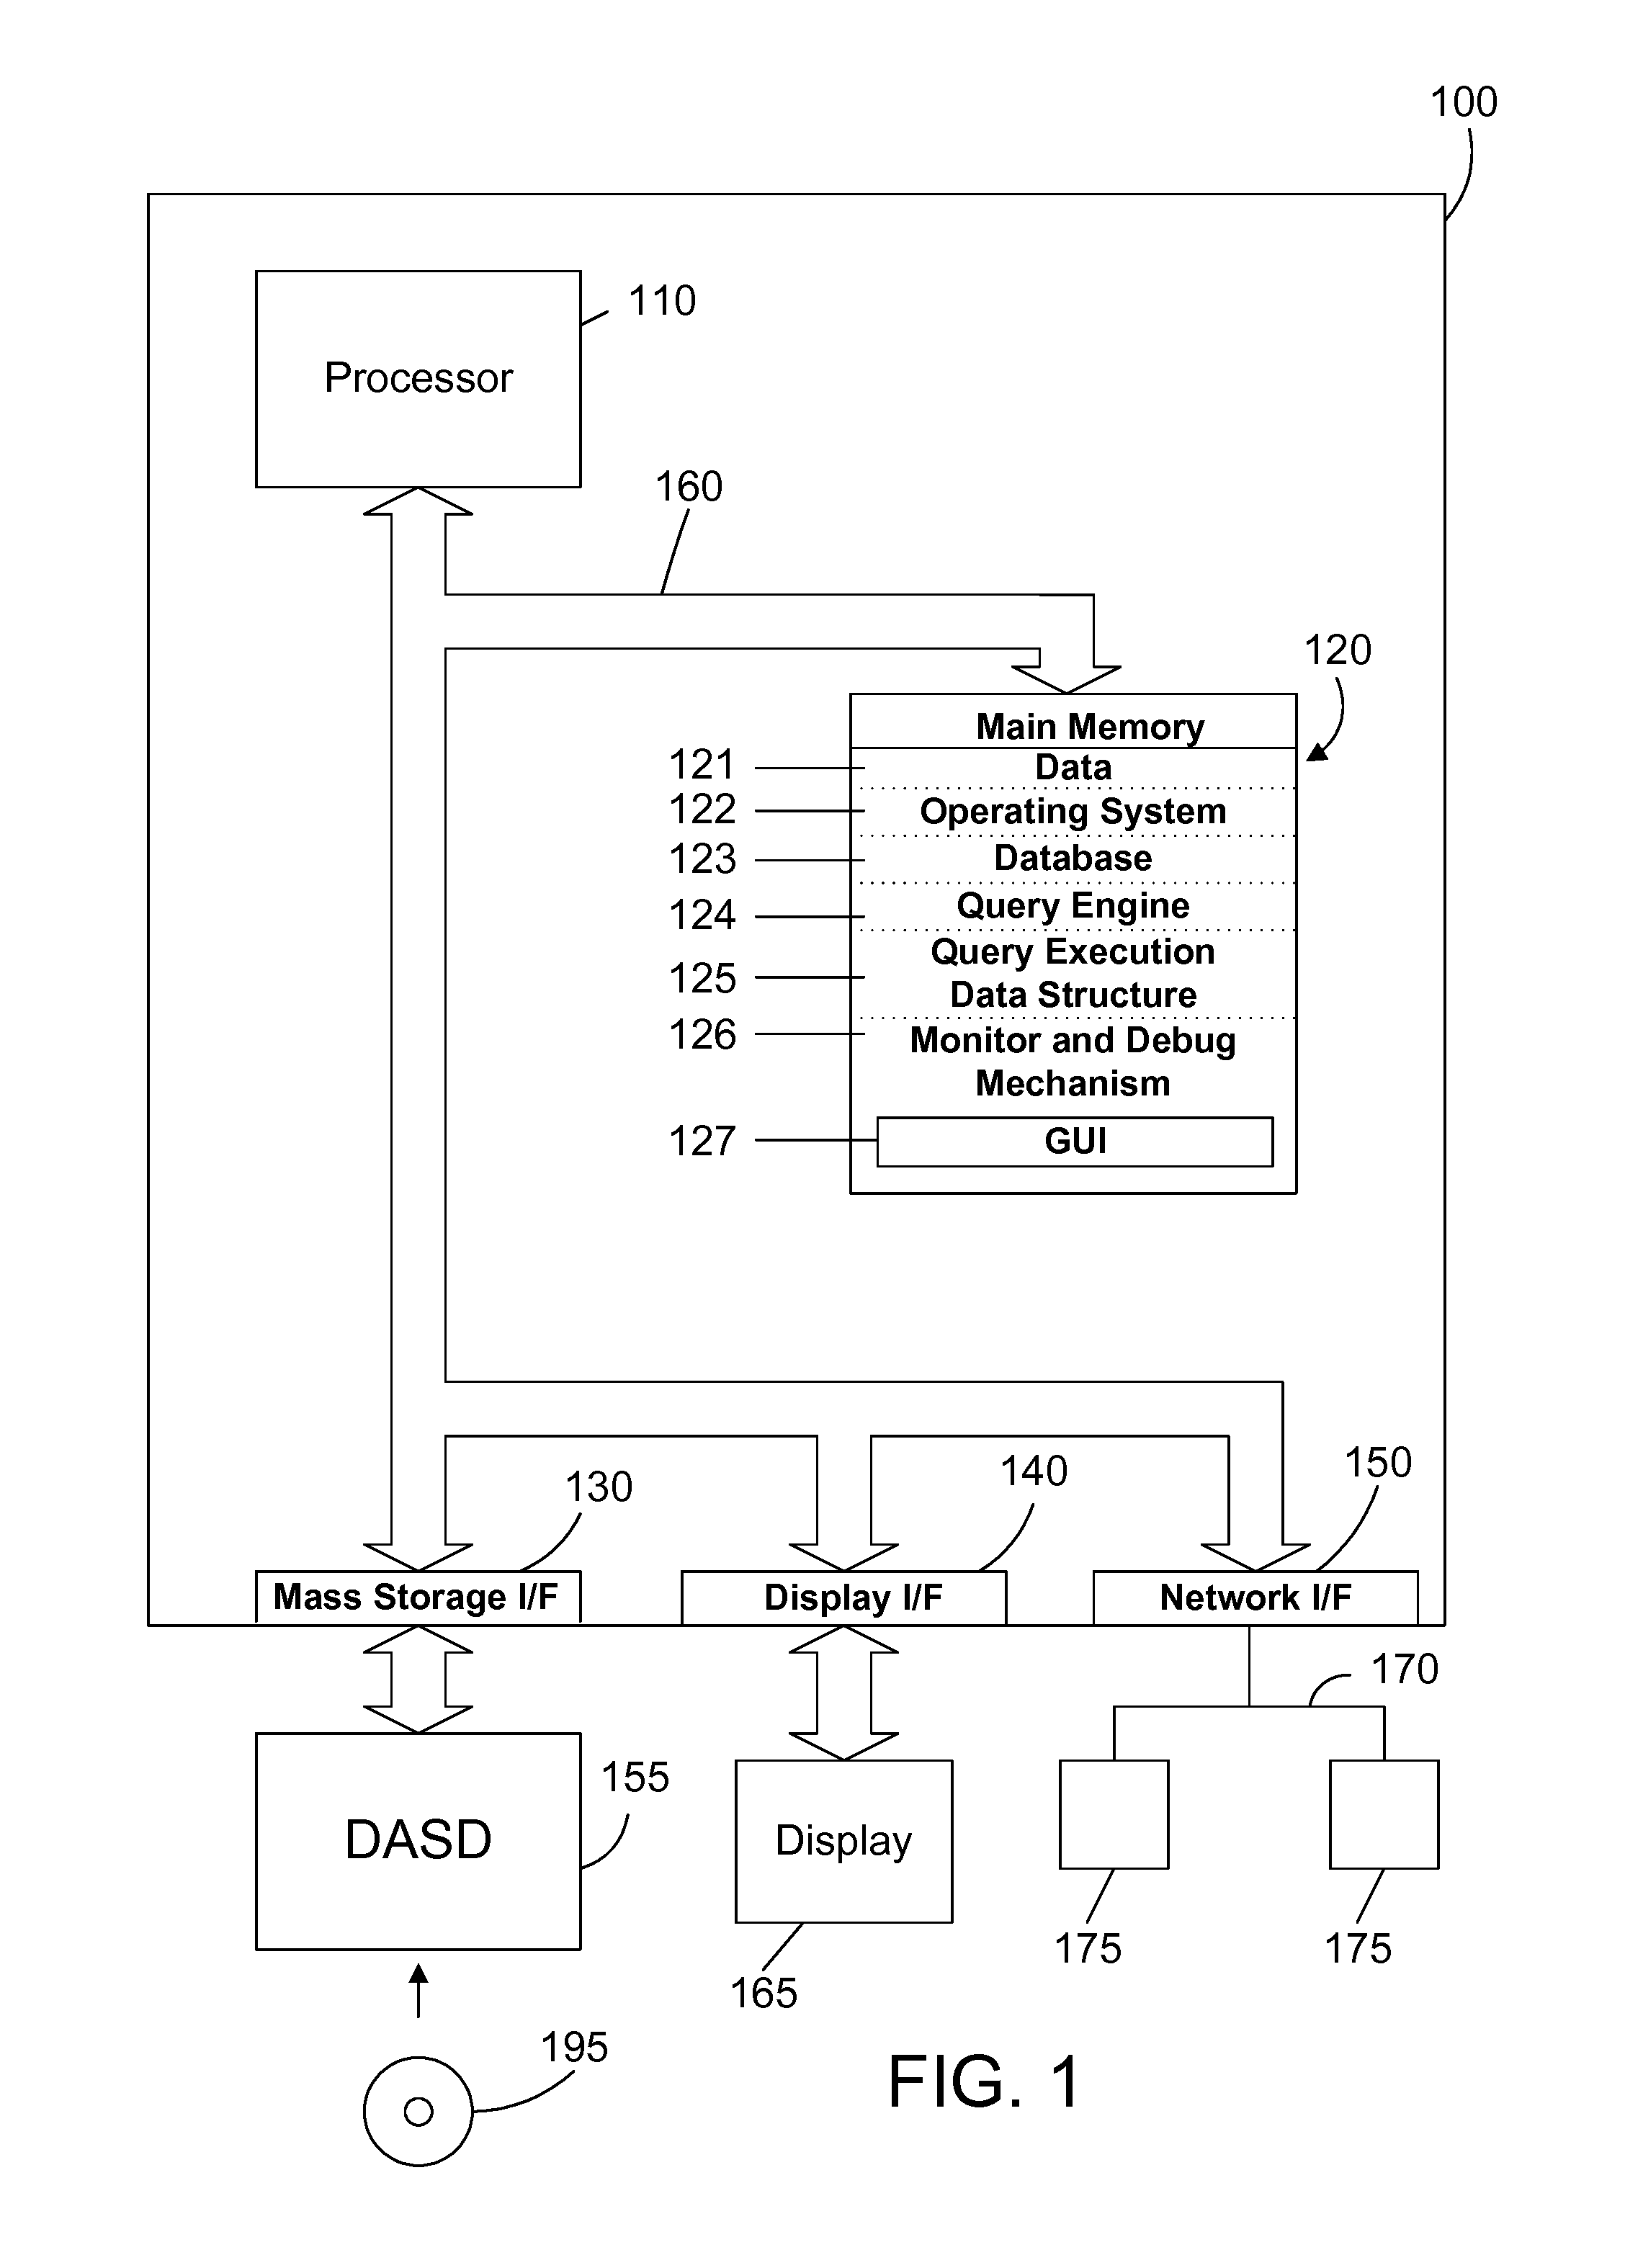 Apparatus and method for monitoring and debugging query execution objects